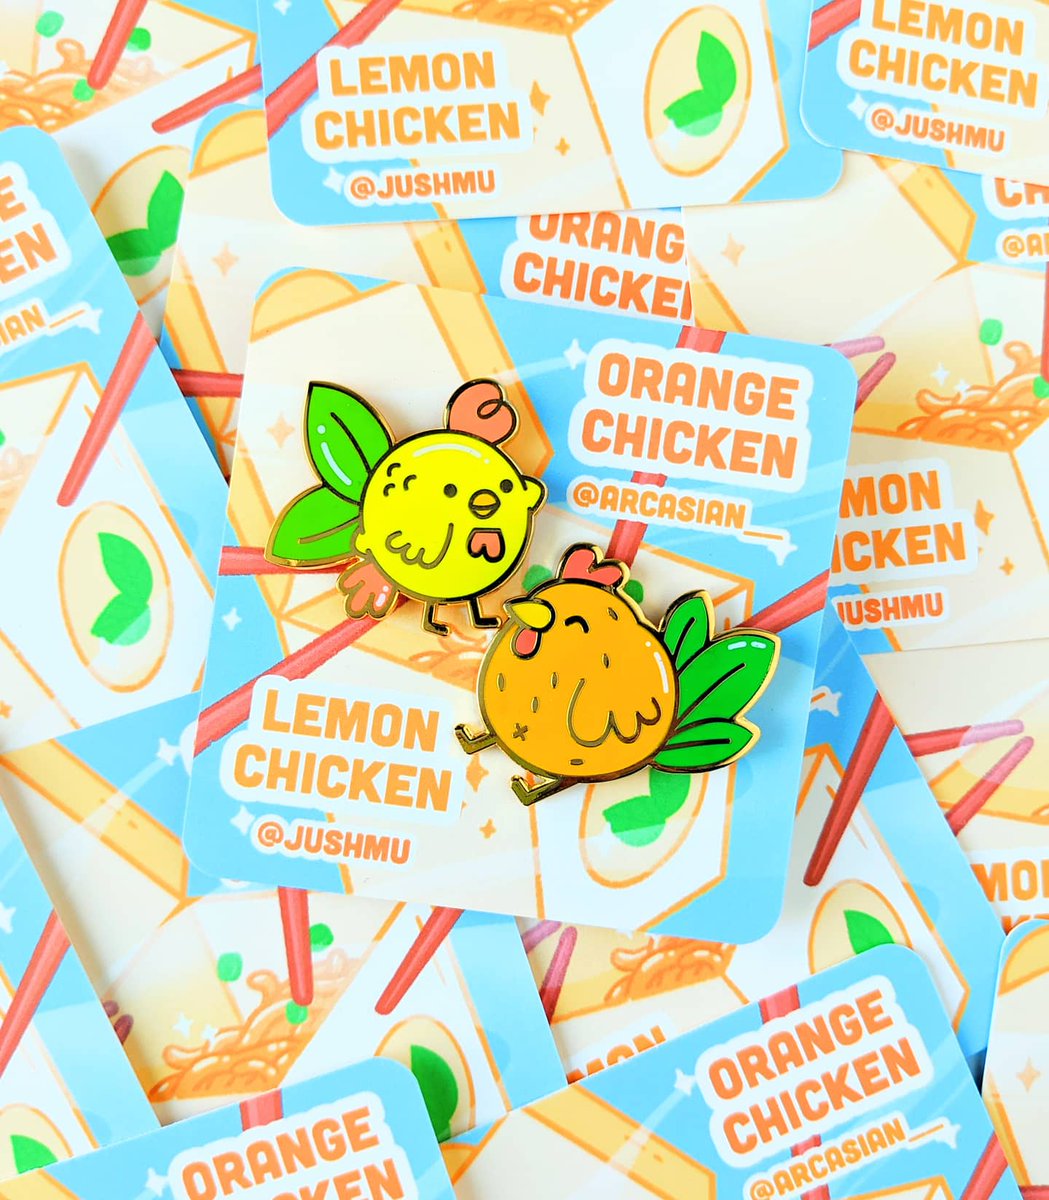 ? ORDER UP! One Flock of a Wok hot and ready! ?

Introducing takeout's dynamic duo, Lemon and Orange Chicken! A collab with the amazing @jushmu!

Pick up a delactable duo over in either of our shops! https://t.co/XMZtAPDzbN 